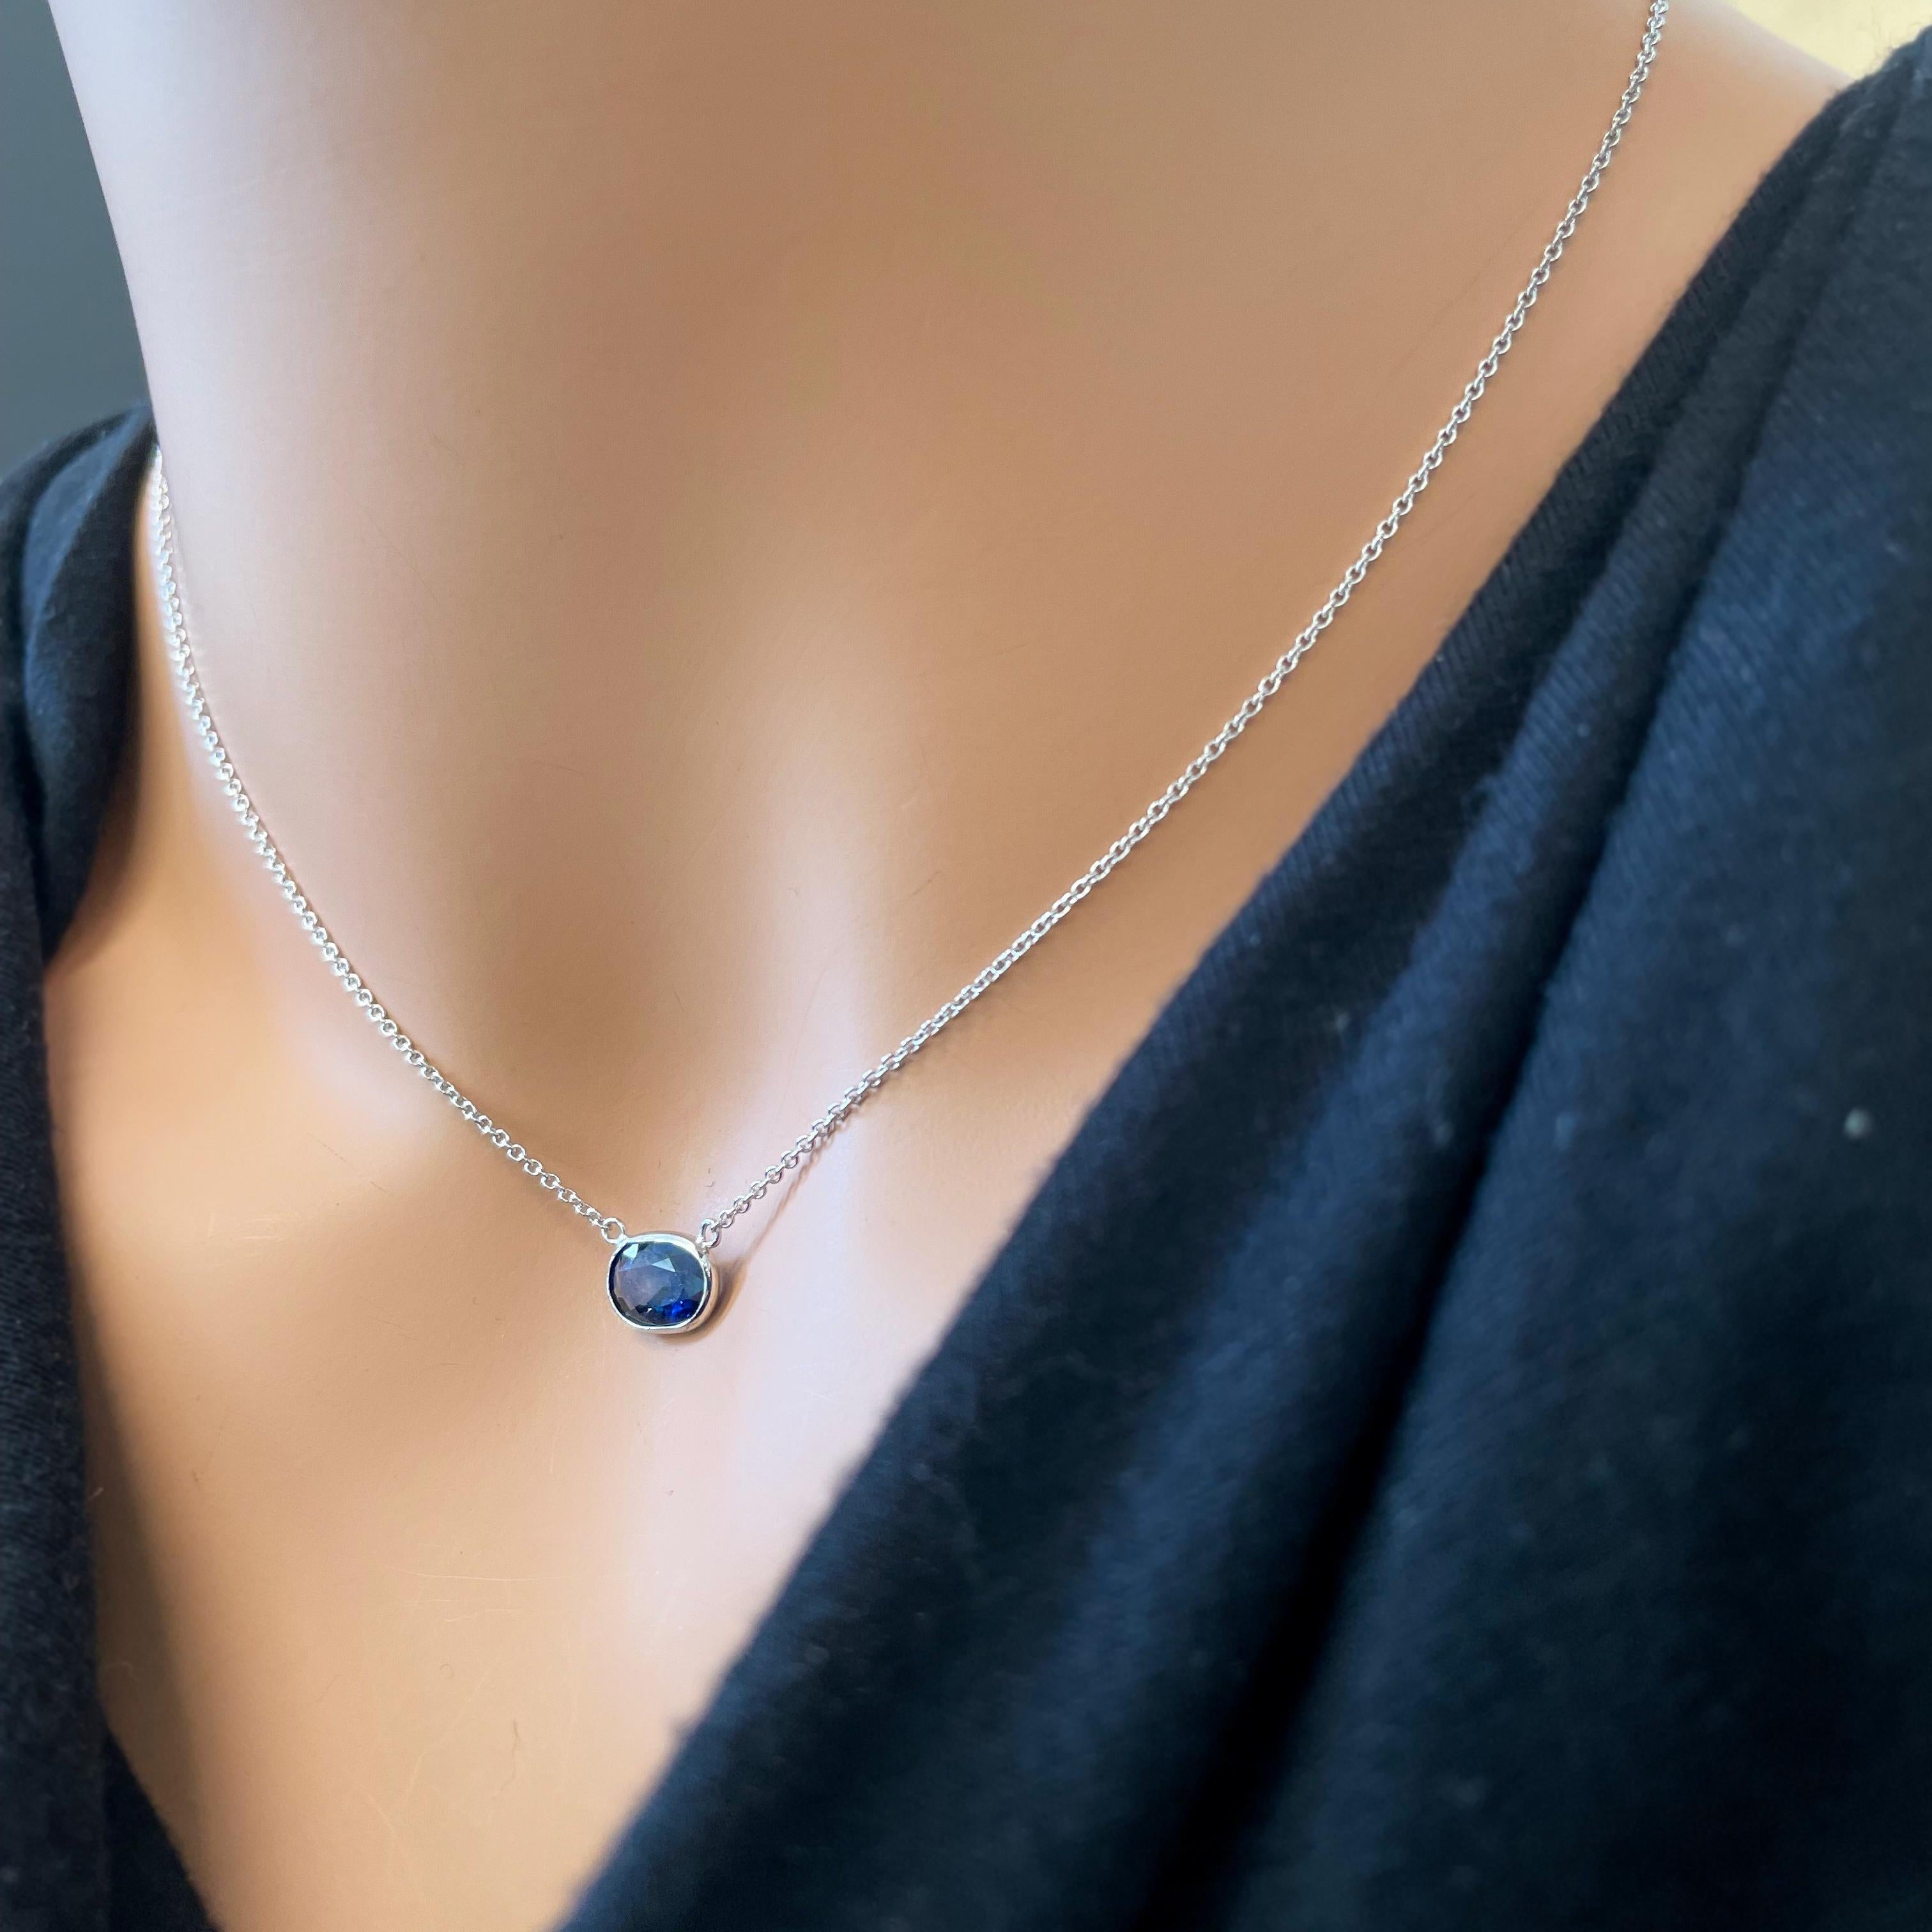 Contemporary 2.19 Carat Blue Oval Sapphire Fashion Necklaces In 14K White Gold  For Sale